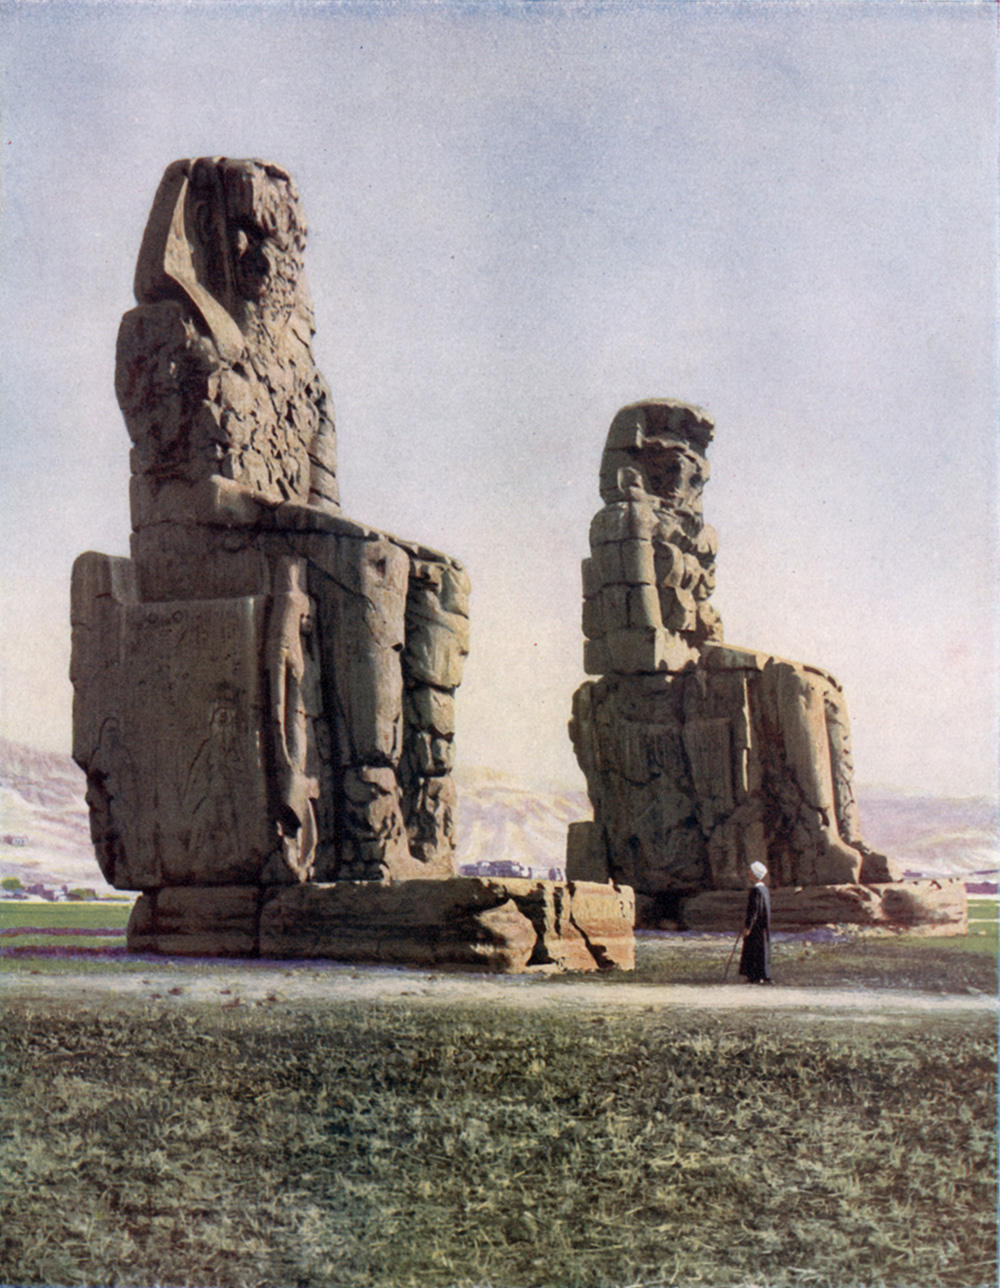 The Colossi of Memnon, illustration from Wonders of the Past, 1910. © Look and Learn/Bridgeman Images